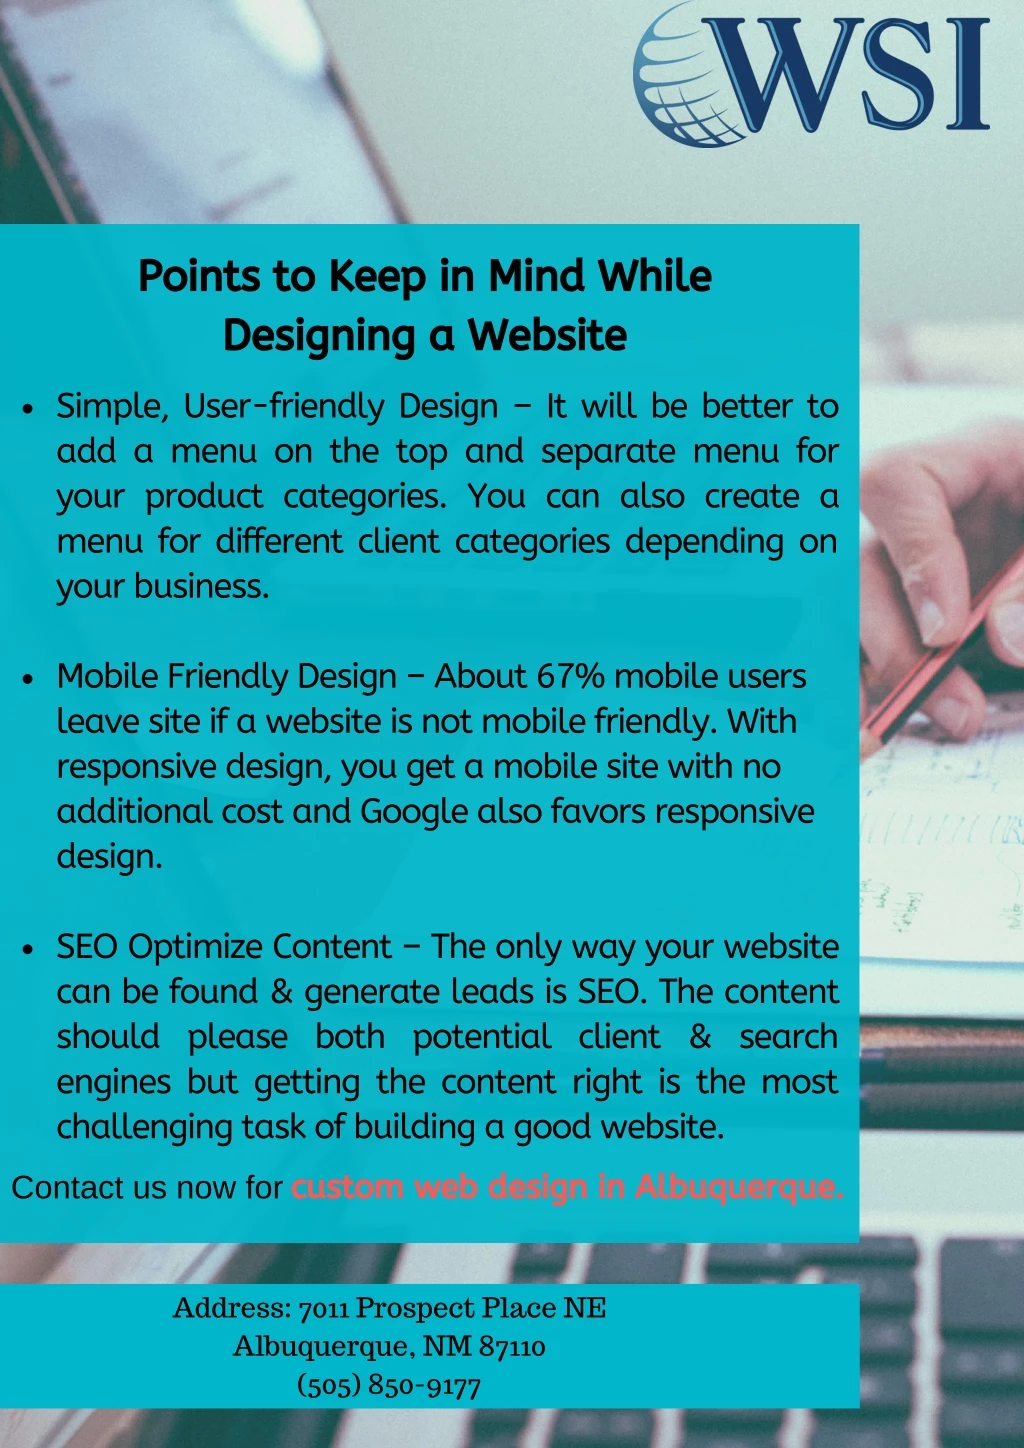 points to keep in mind while designing a website